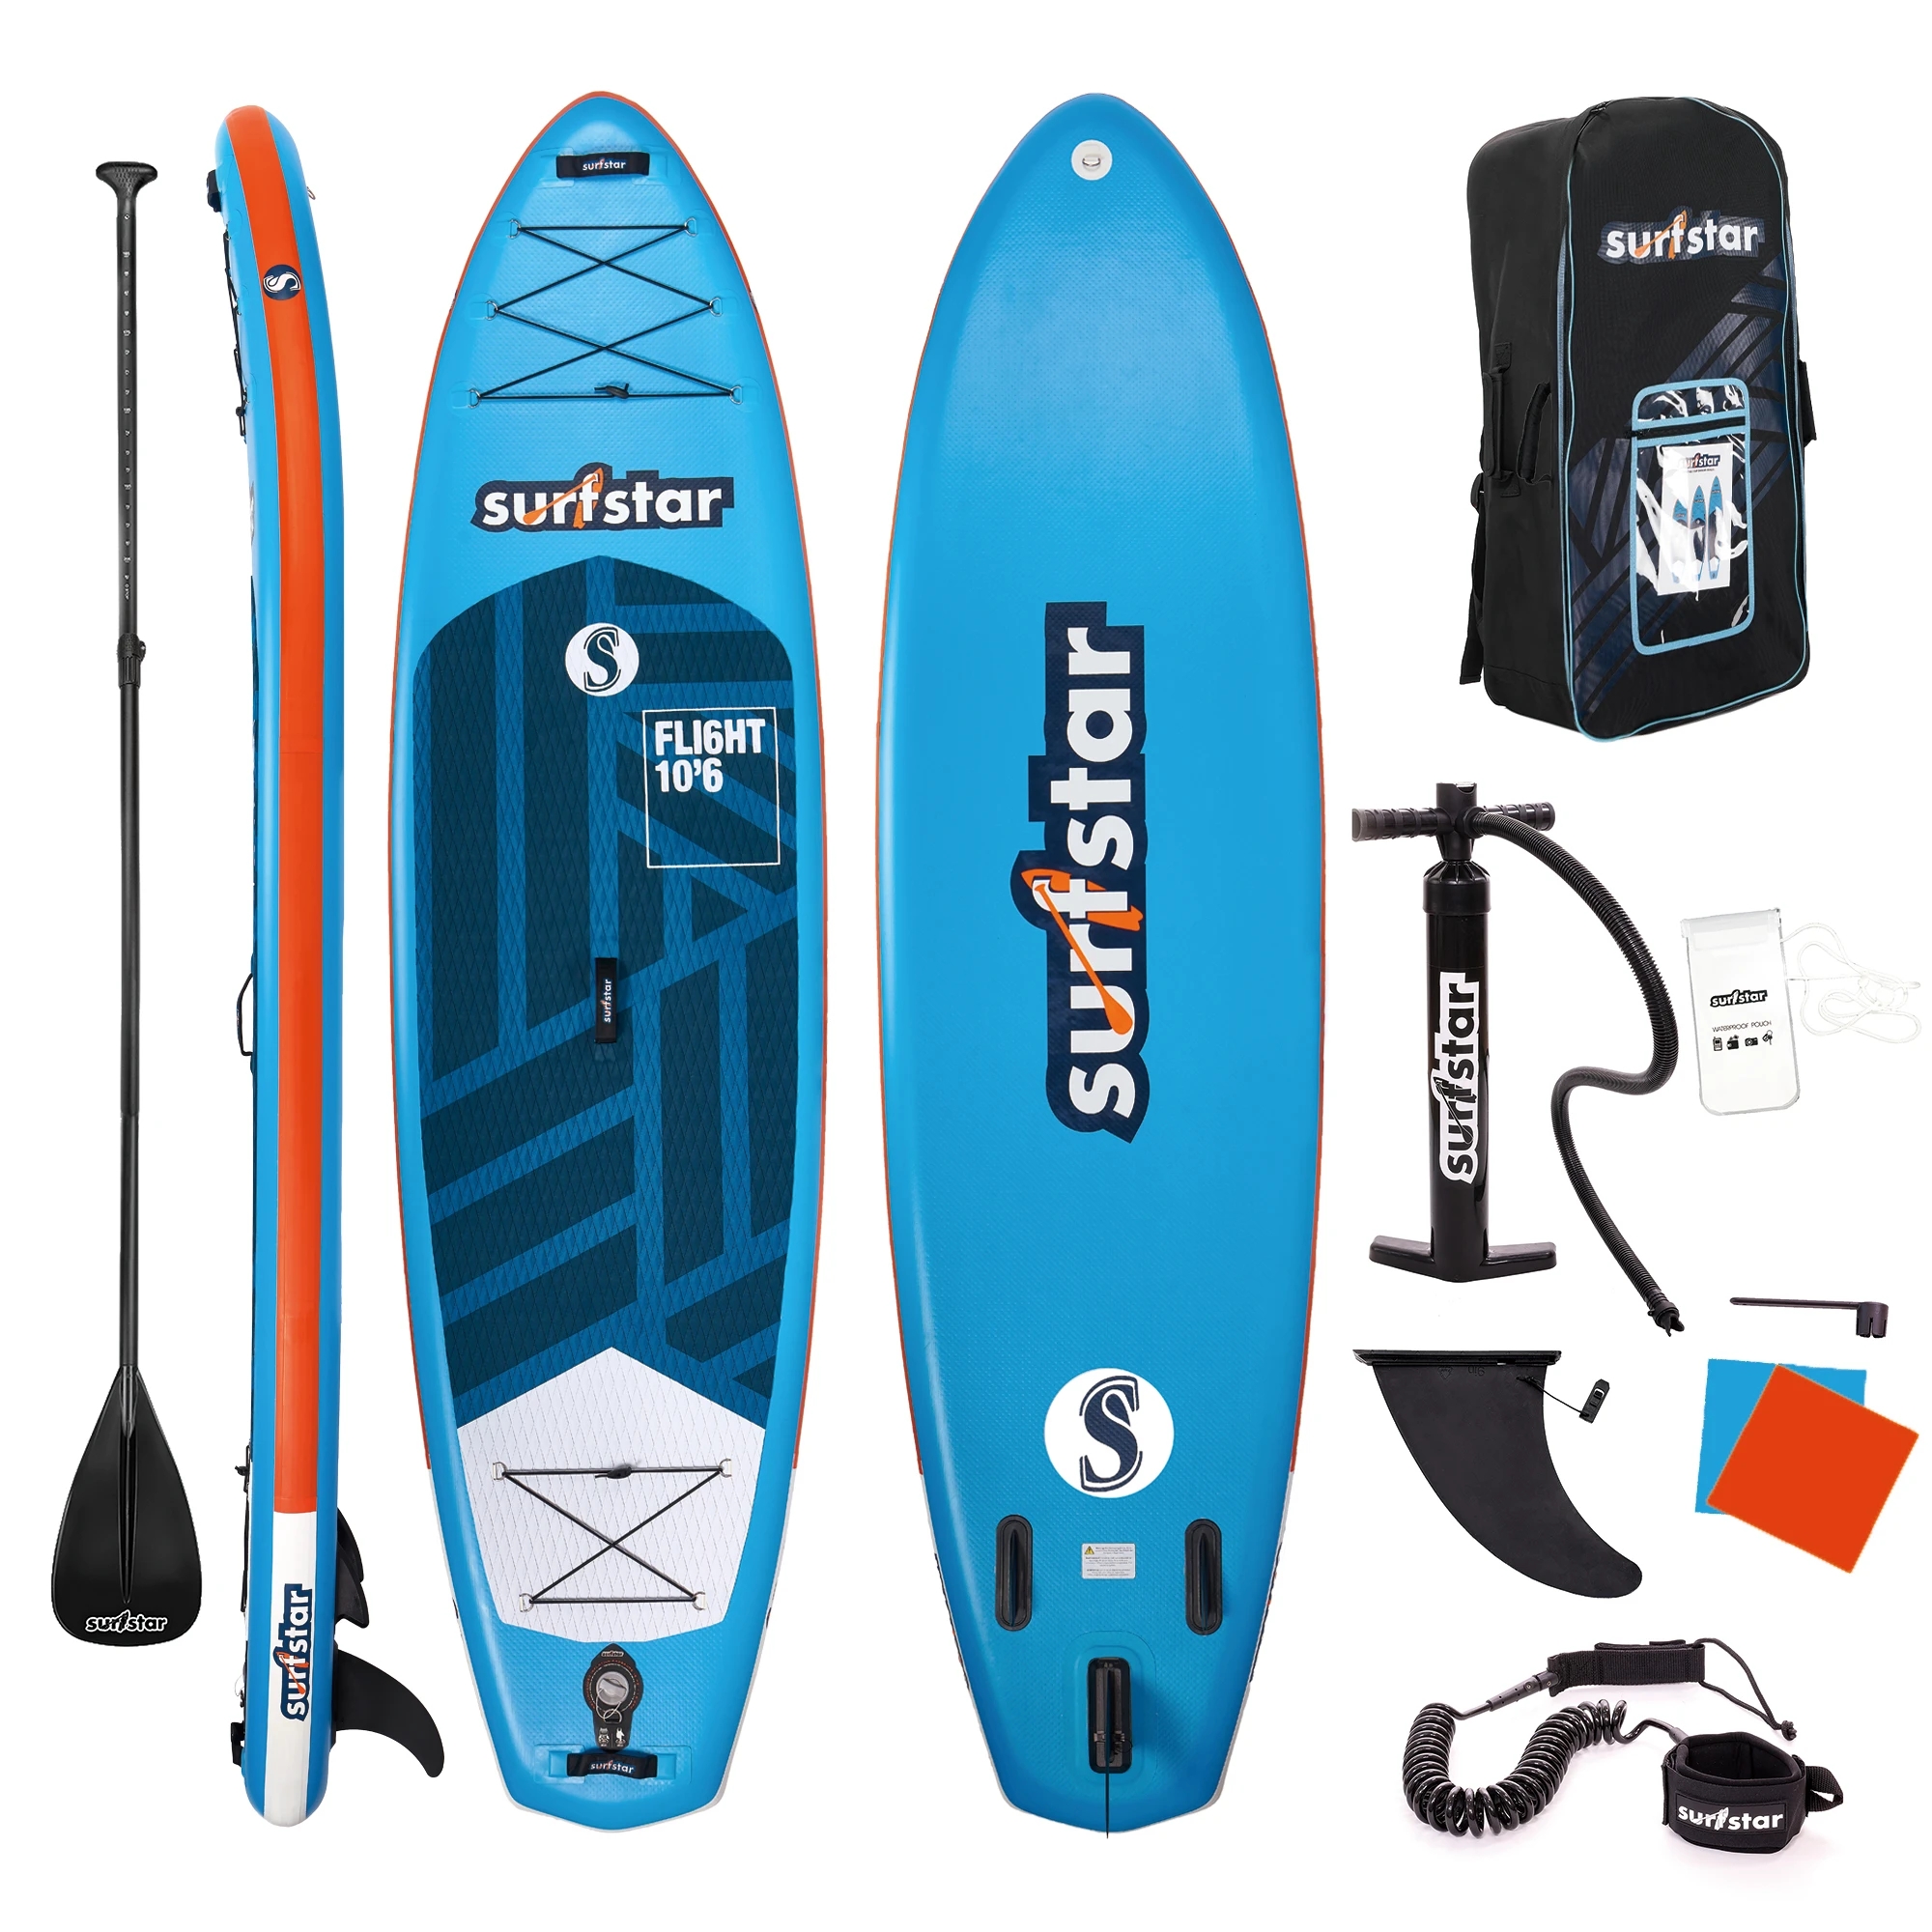 Surfstar SUP 10'6 x 33' x 6' SUP Stand Up Paddling Board